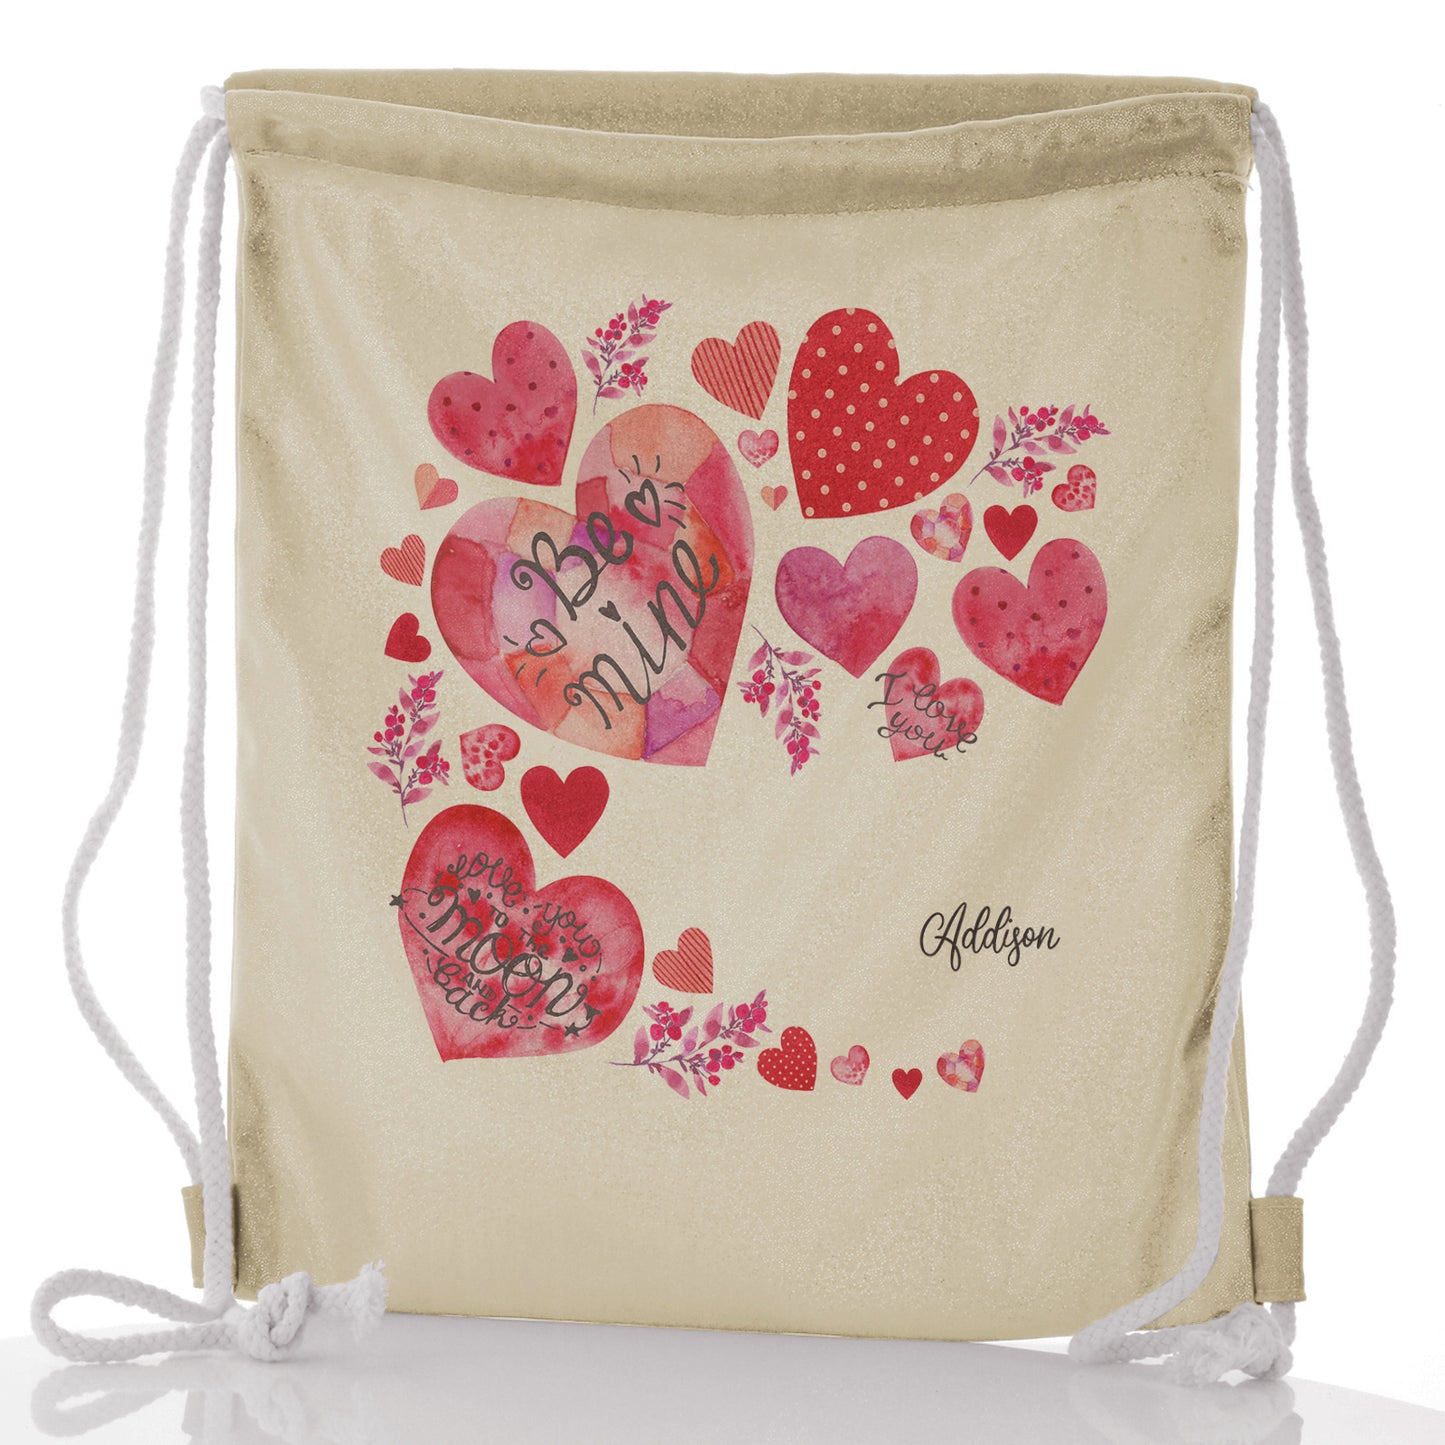 Personalised Glitter Drawstring Backpack with Stylish Text and Material Hearts Love Message Print